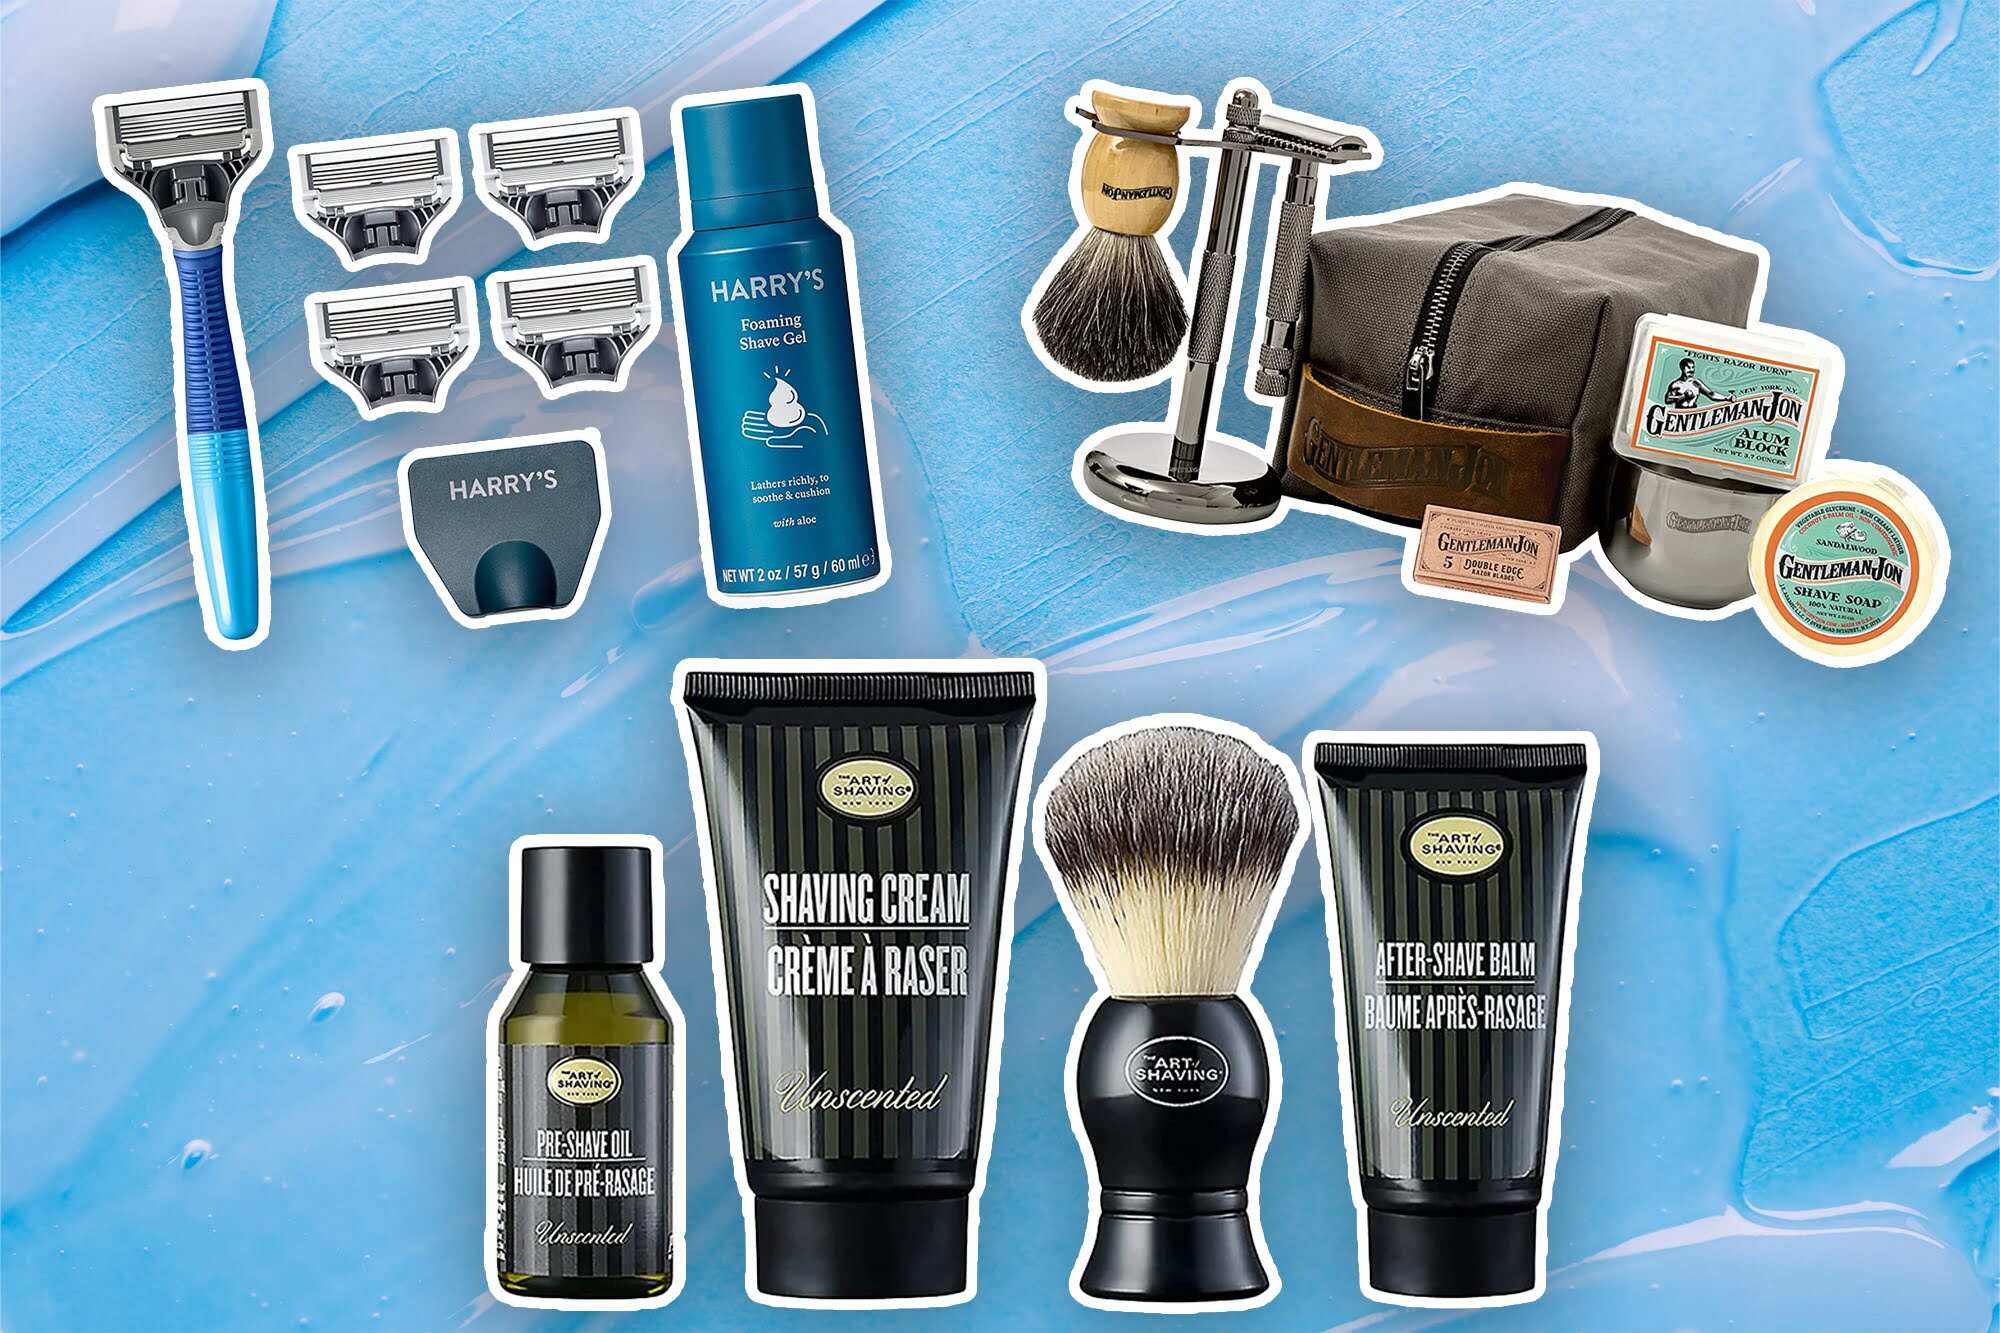 Shaving Kit Review: A Comprehensive Analysis of Top Brands